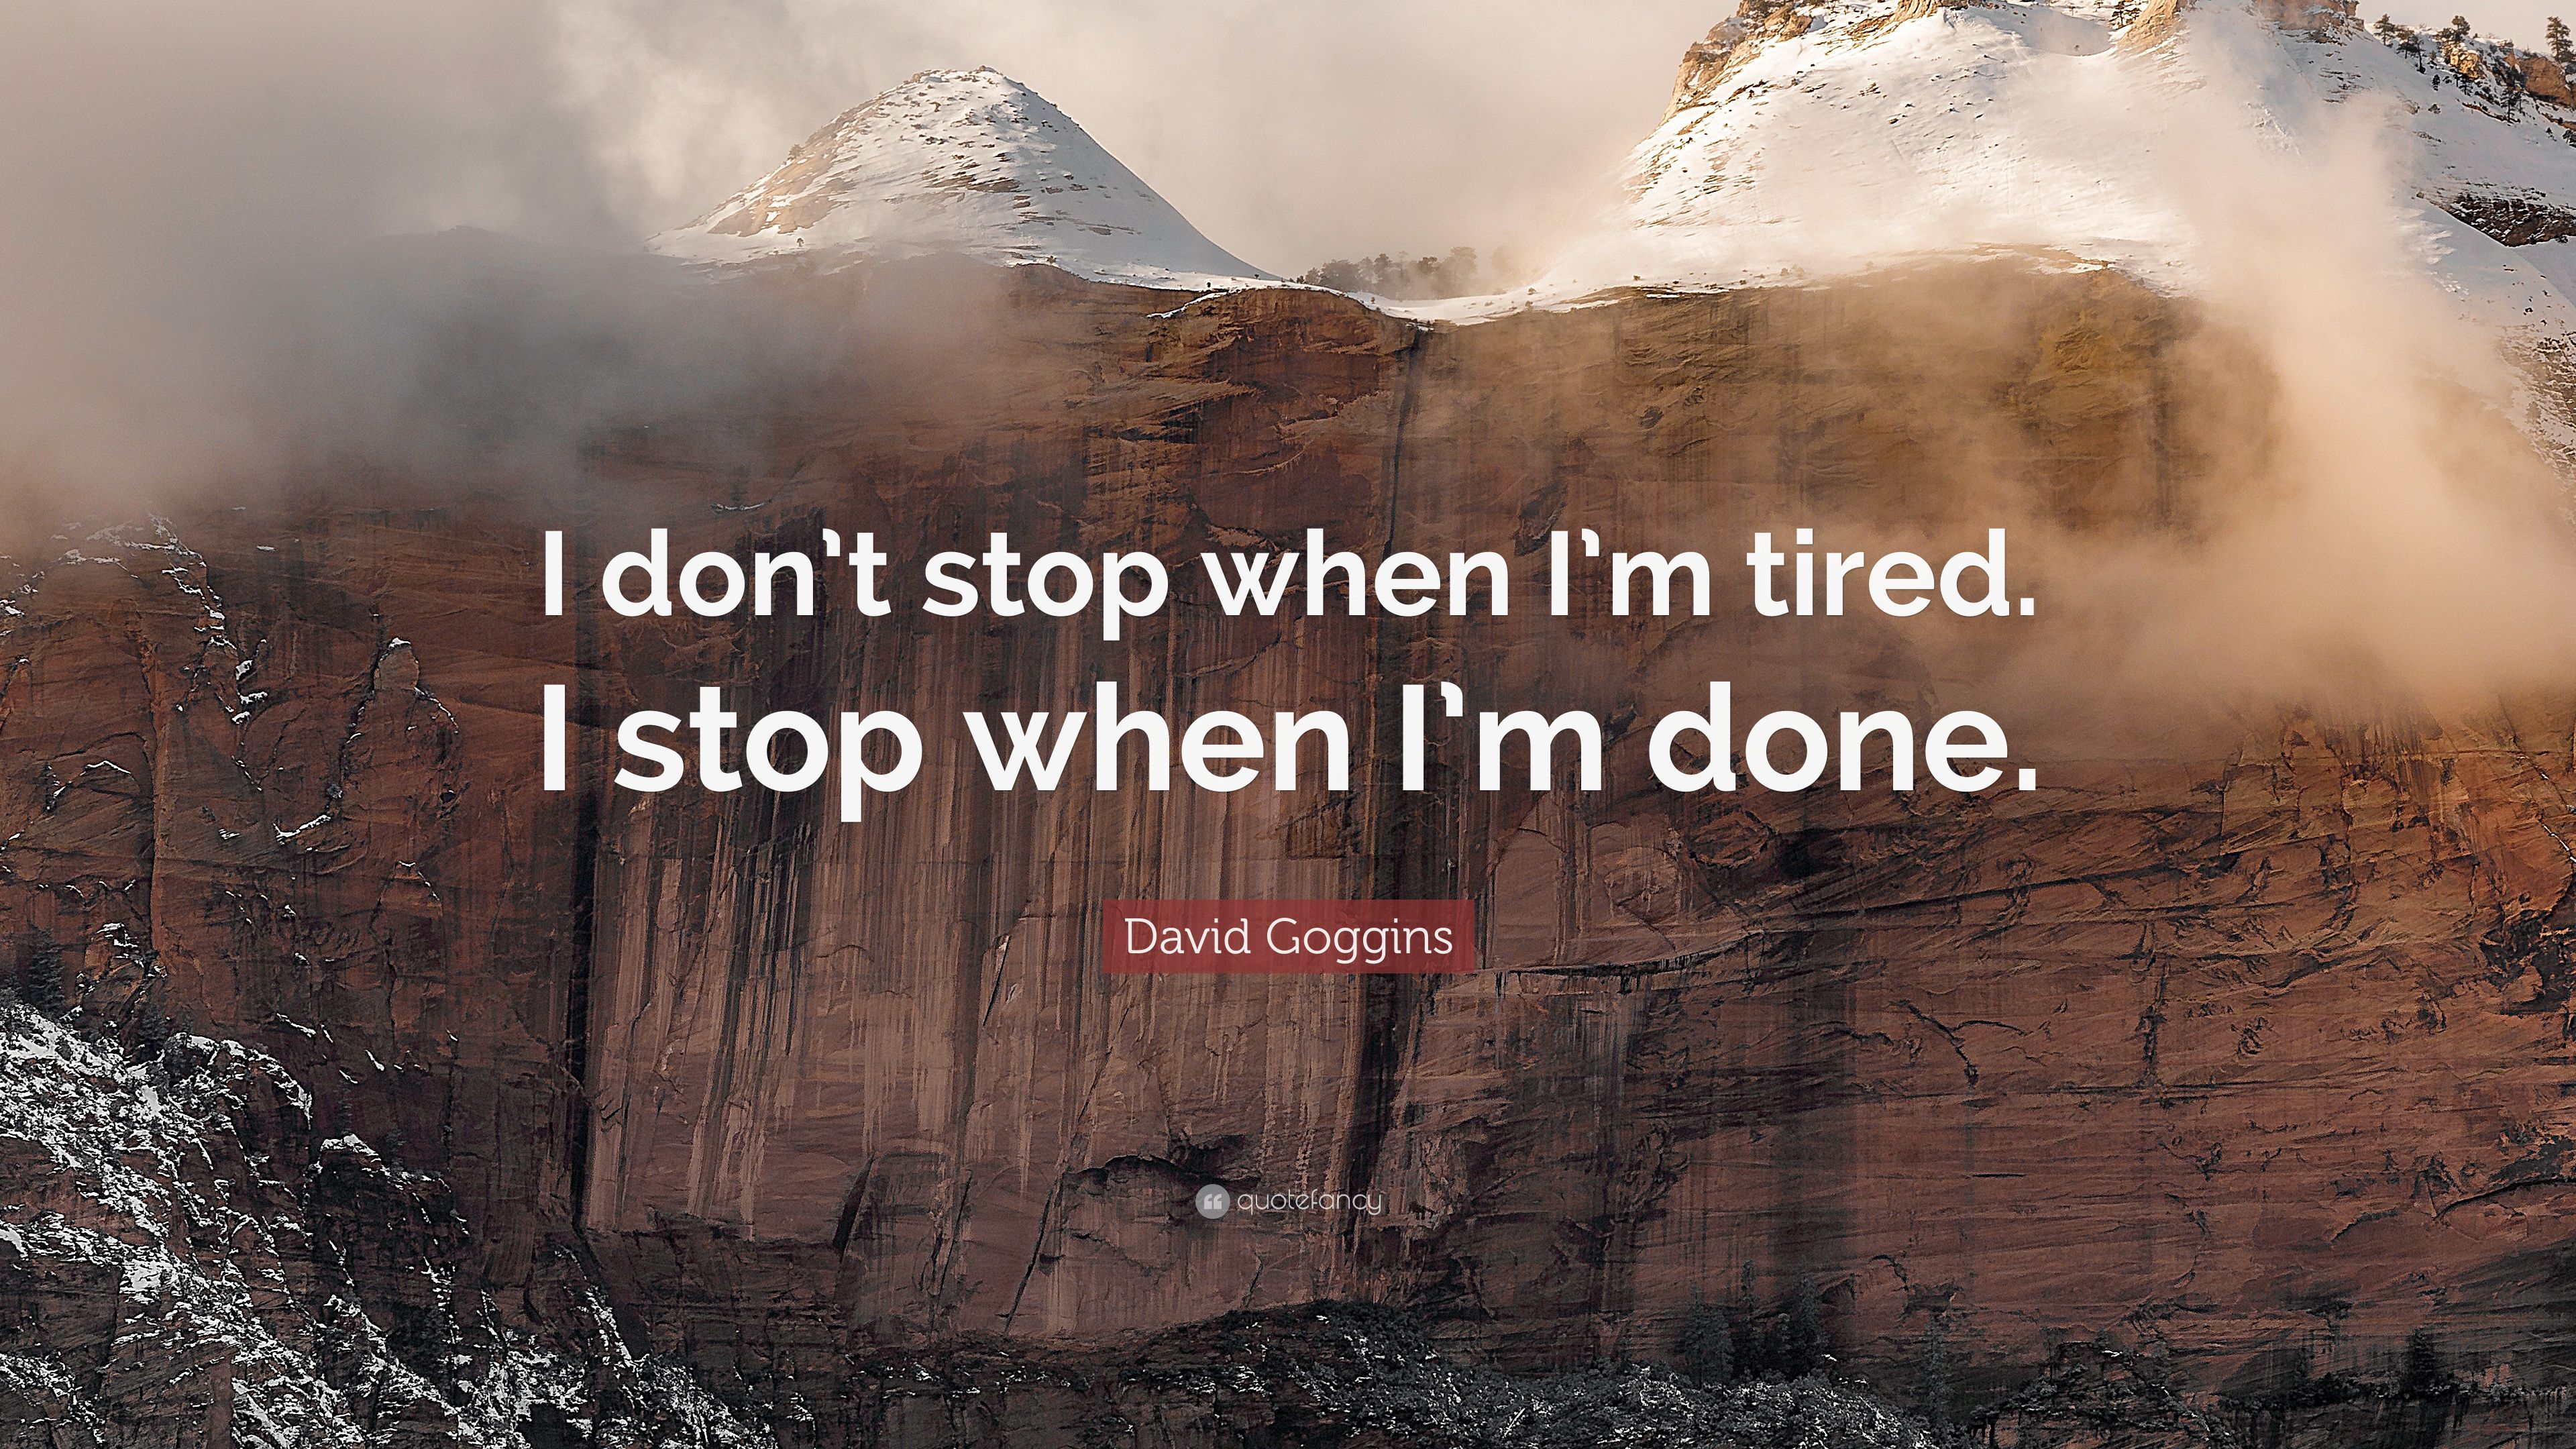 David Goggins Quote: “I don't stop when I'm tired. I stop when I'm